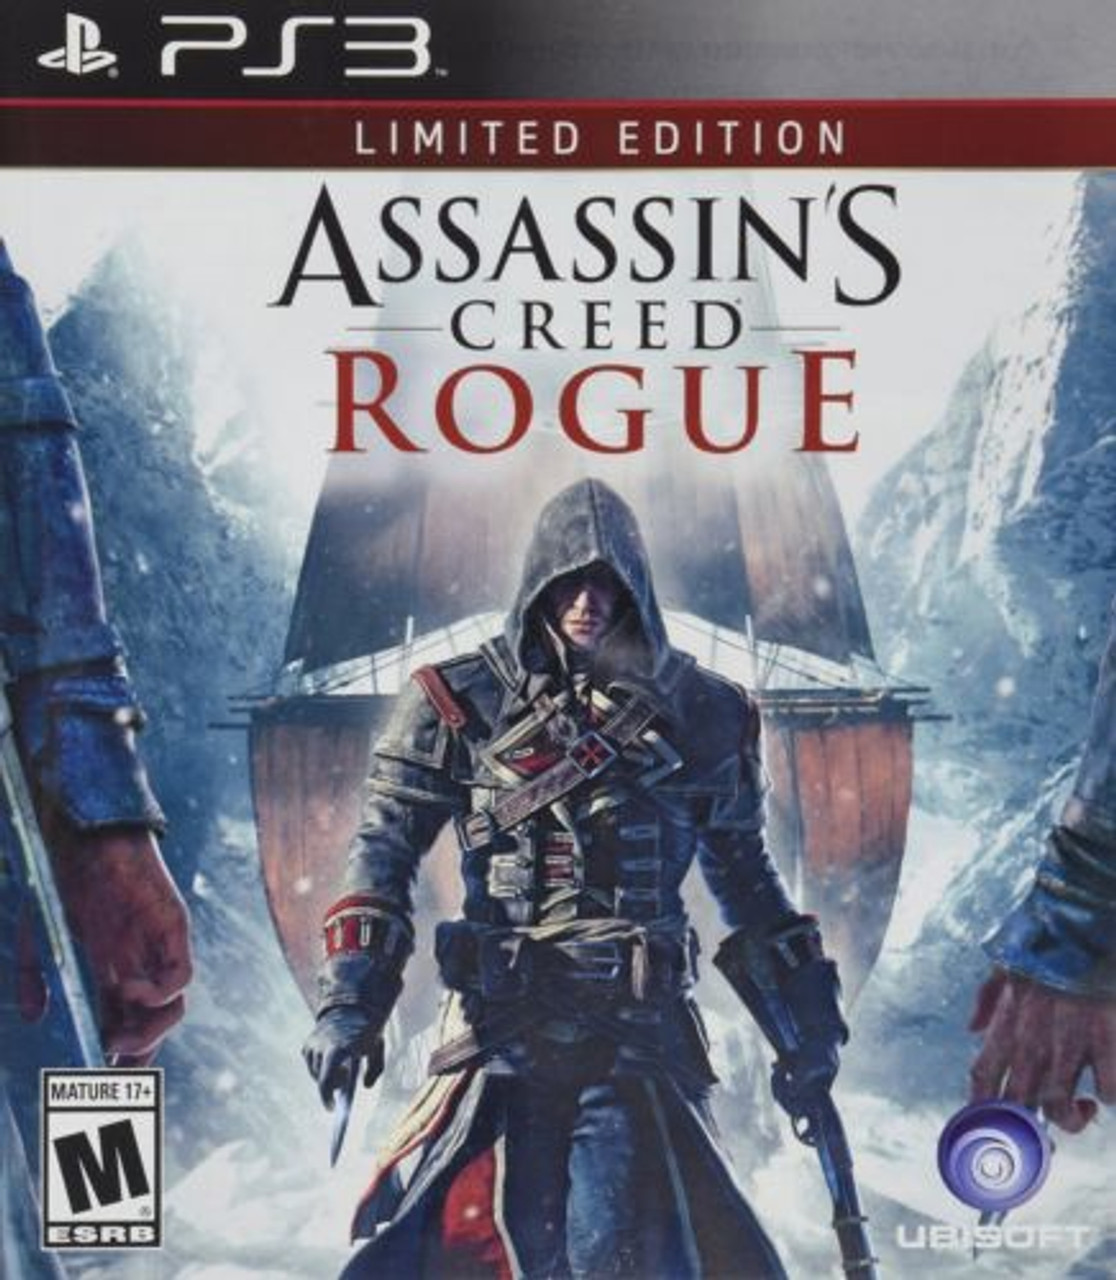  Assassin's Creed (PS3) : Video Games